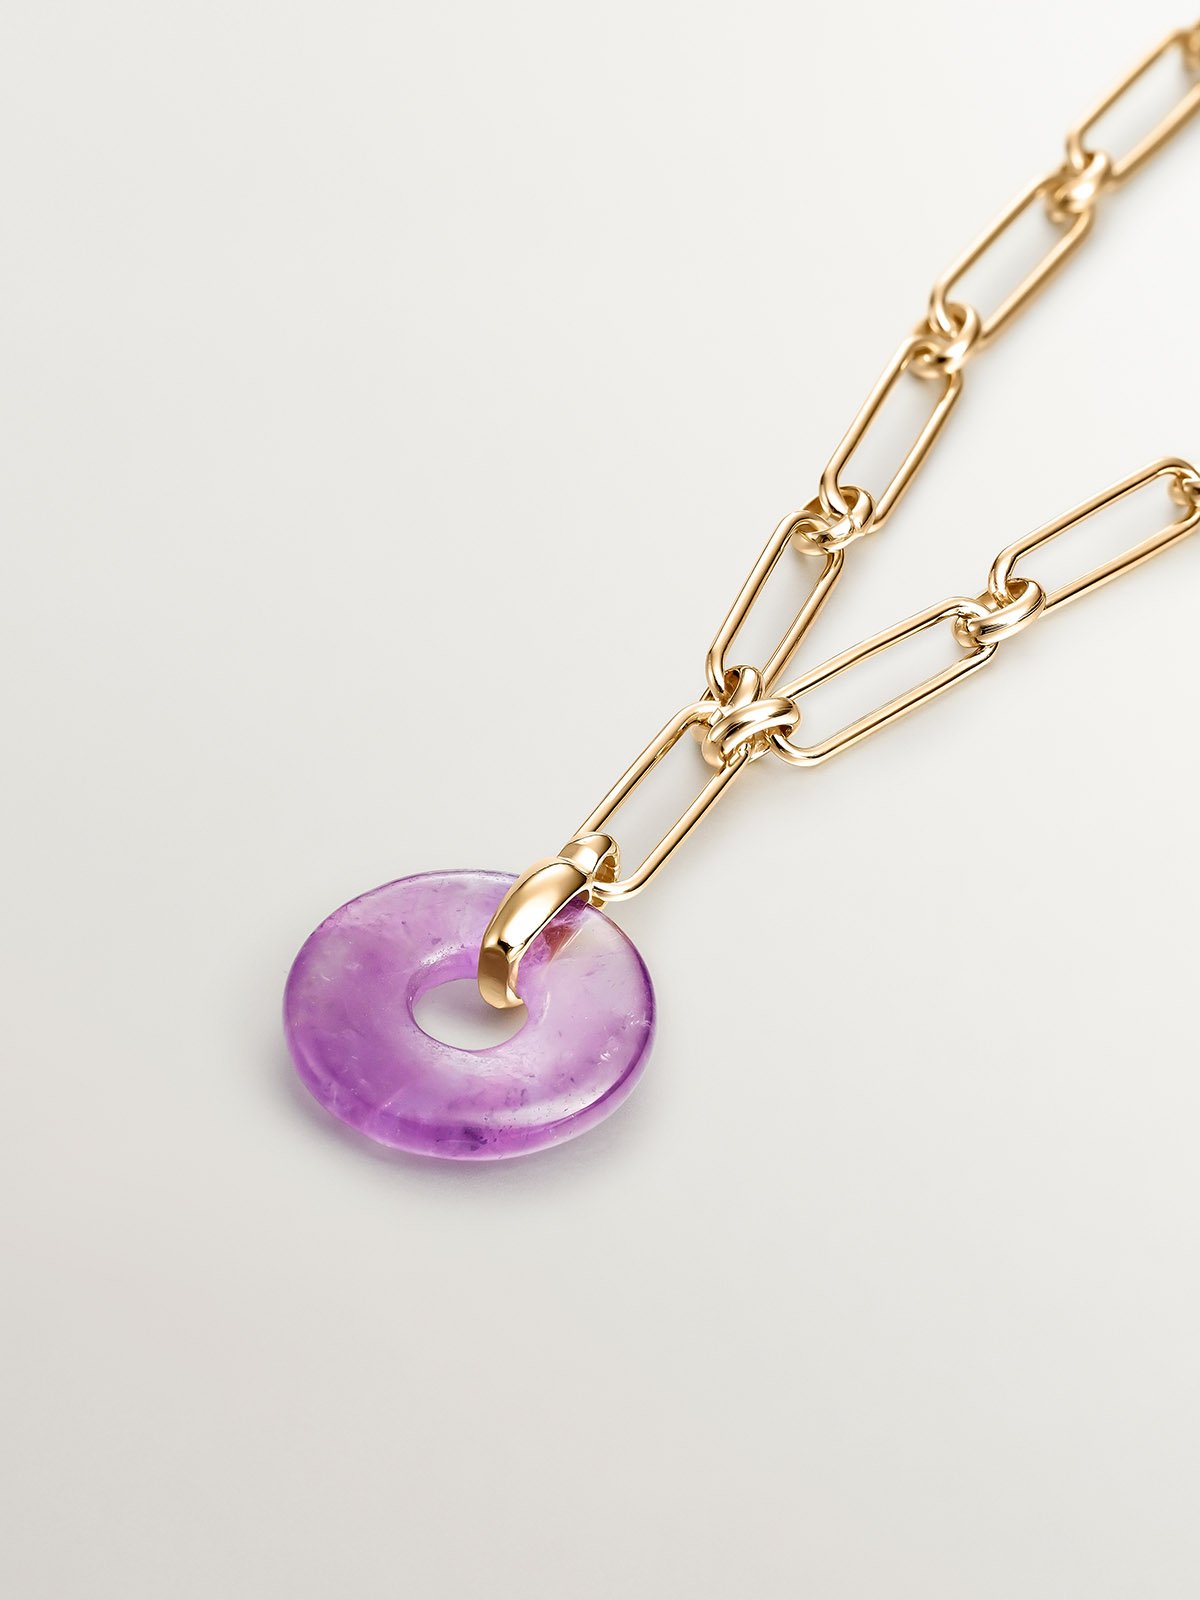 925 Silver necklace dipped in 18K yellow gold with pink amethyst